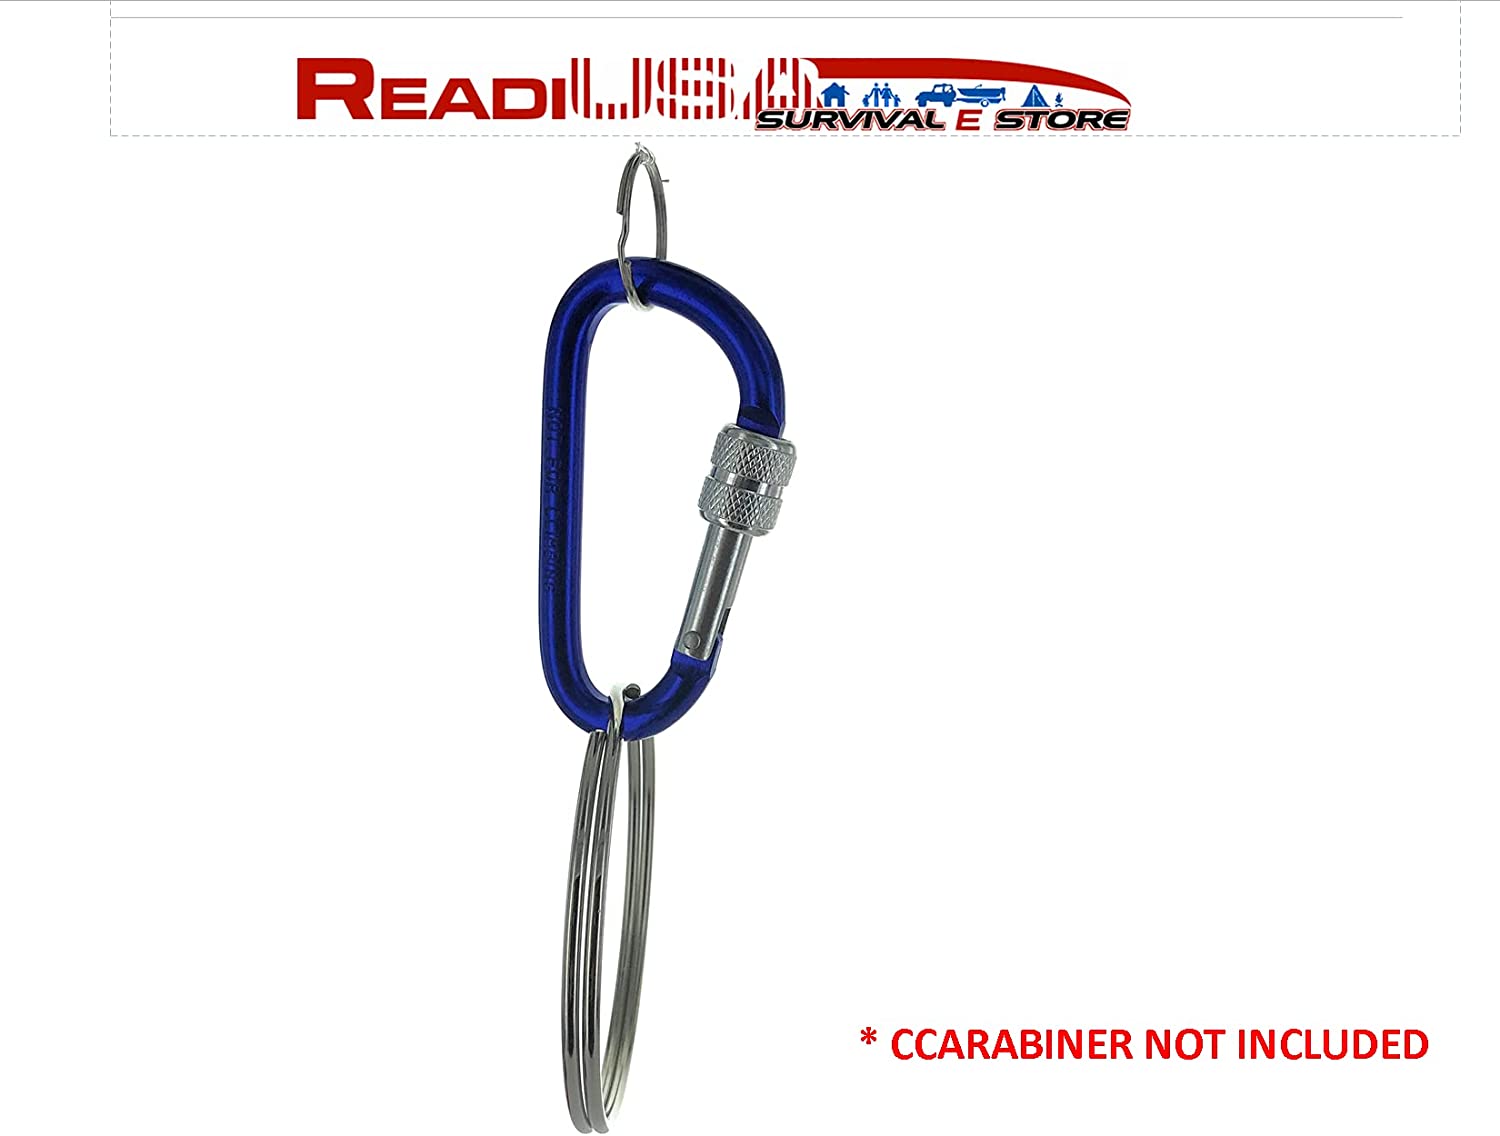 Shop for and Buy Pull Apart Janitors Key Ring 4.75 Inch Diameter at .  Large selection and bulk discounts available.